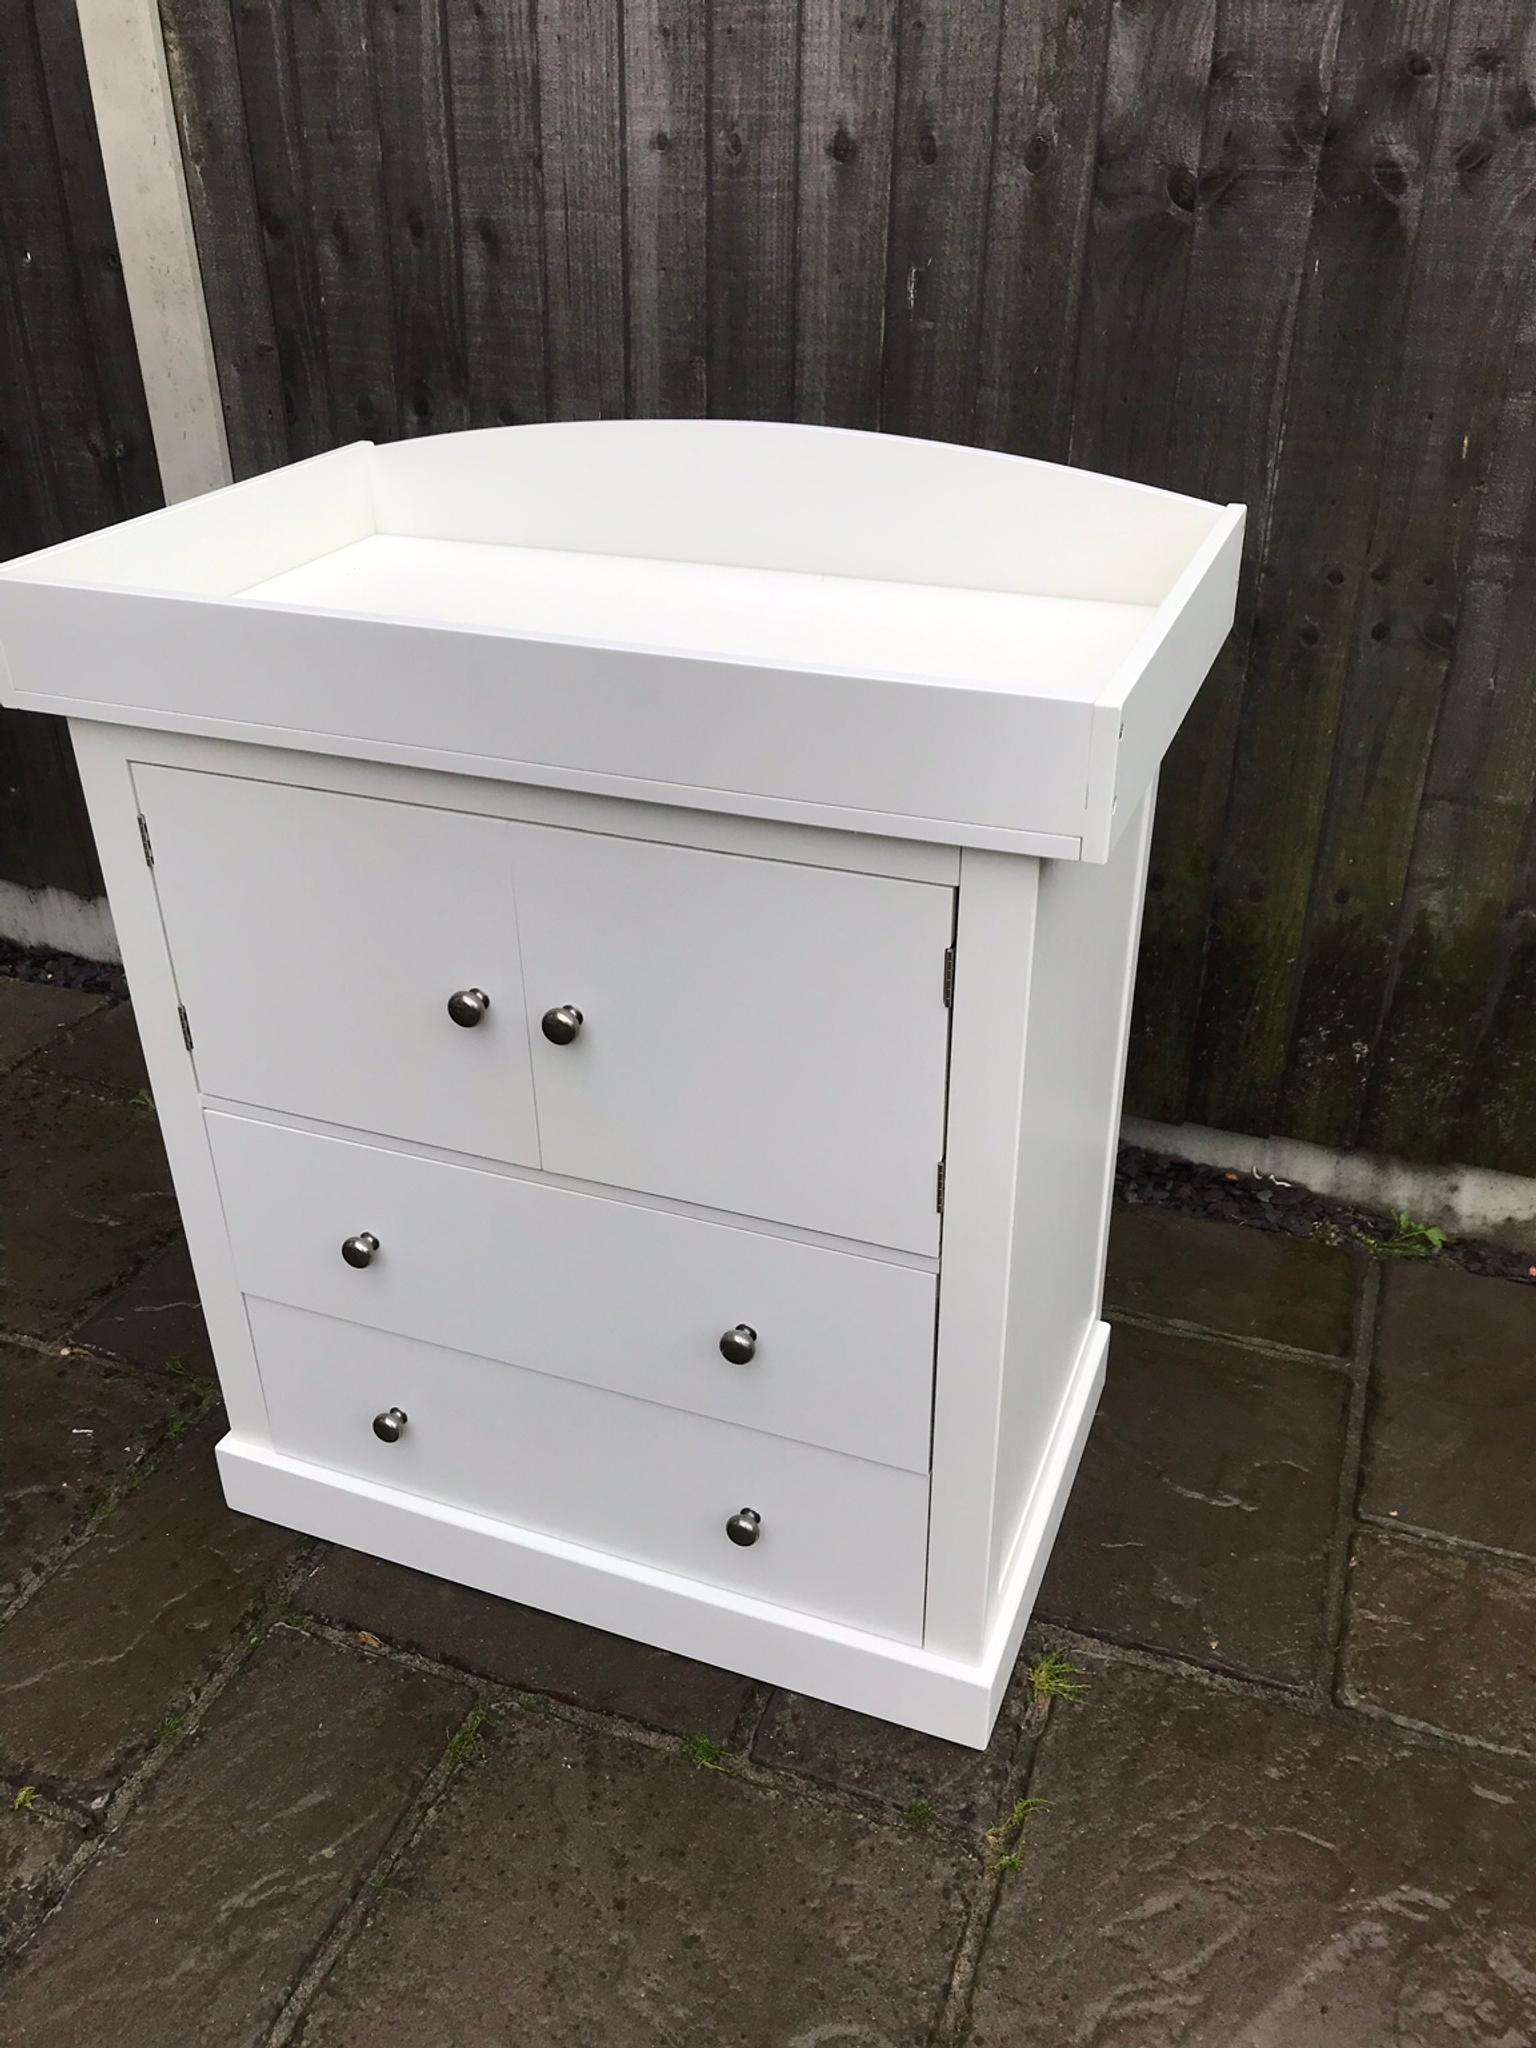 Mamas And Papas Dresser Changer In Basildon For 100 00 For Sale